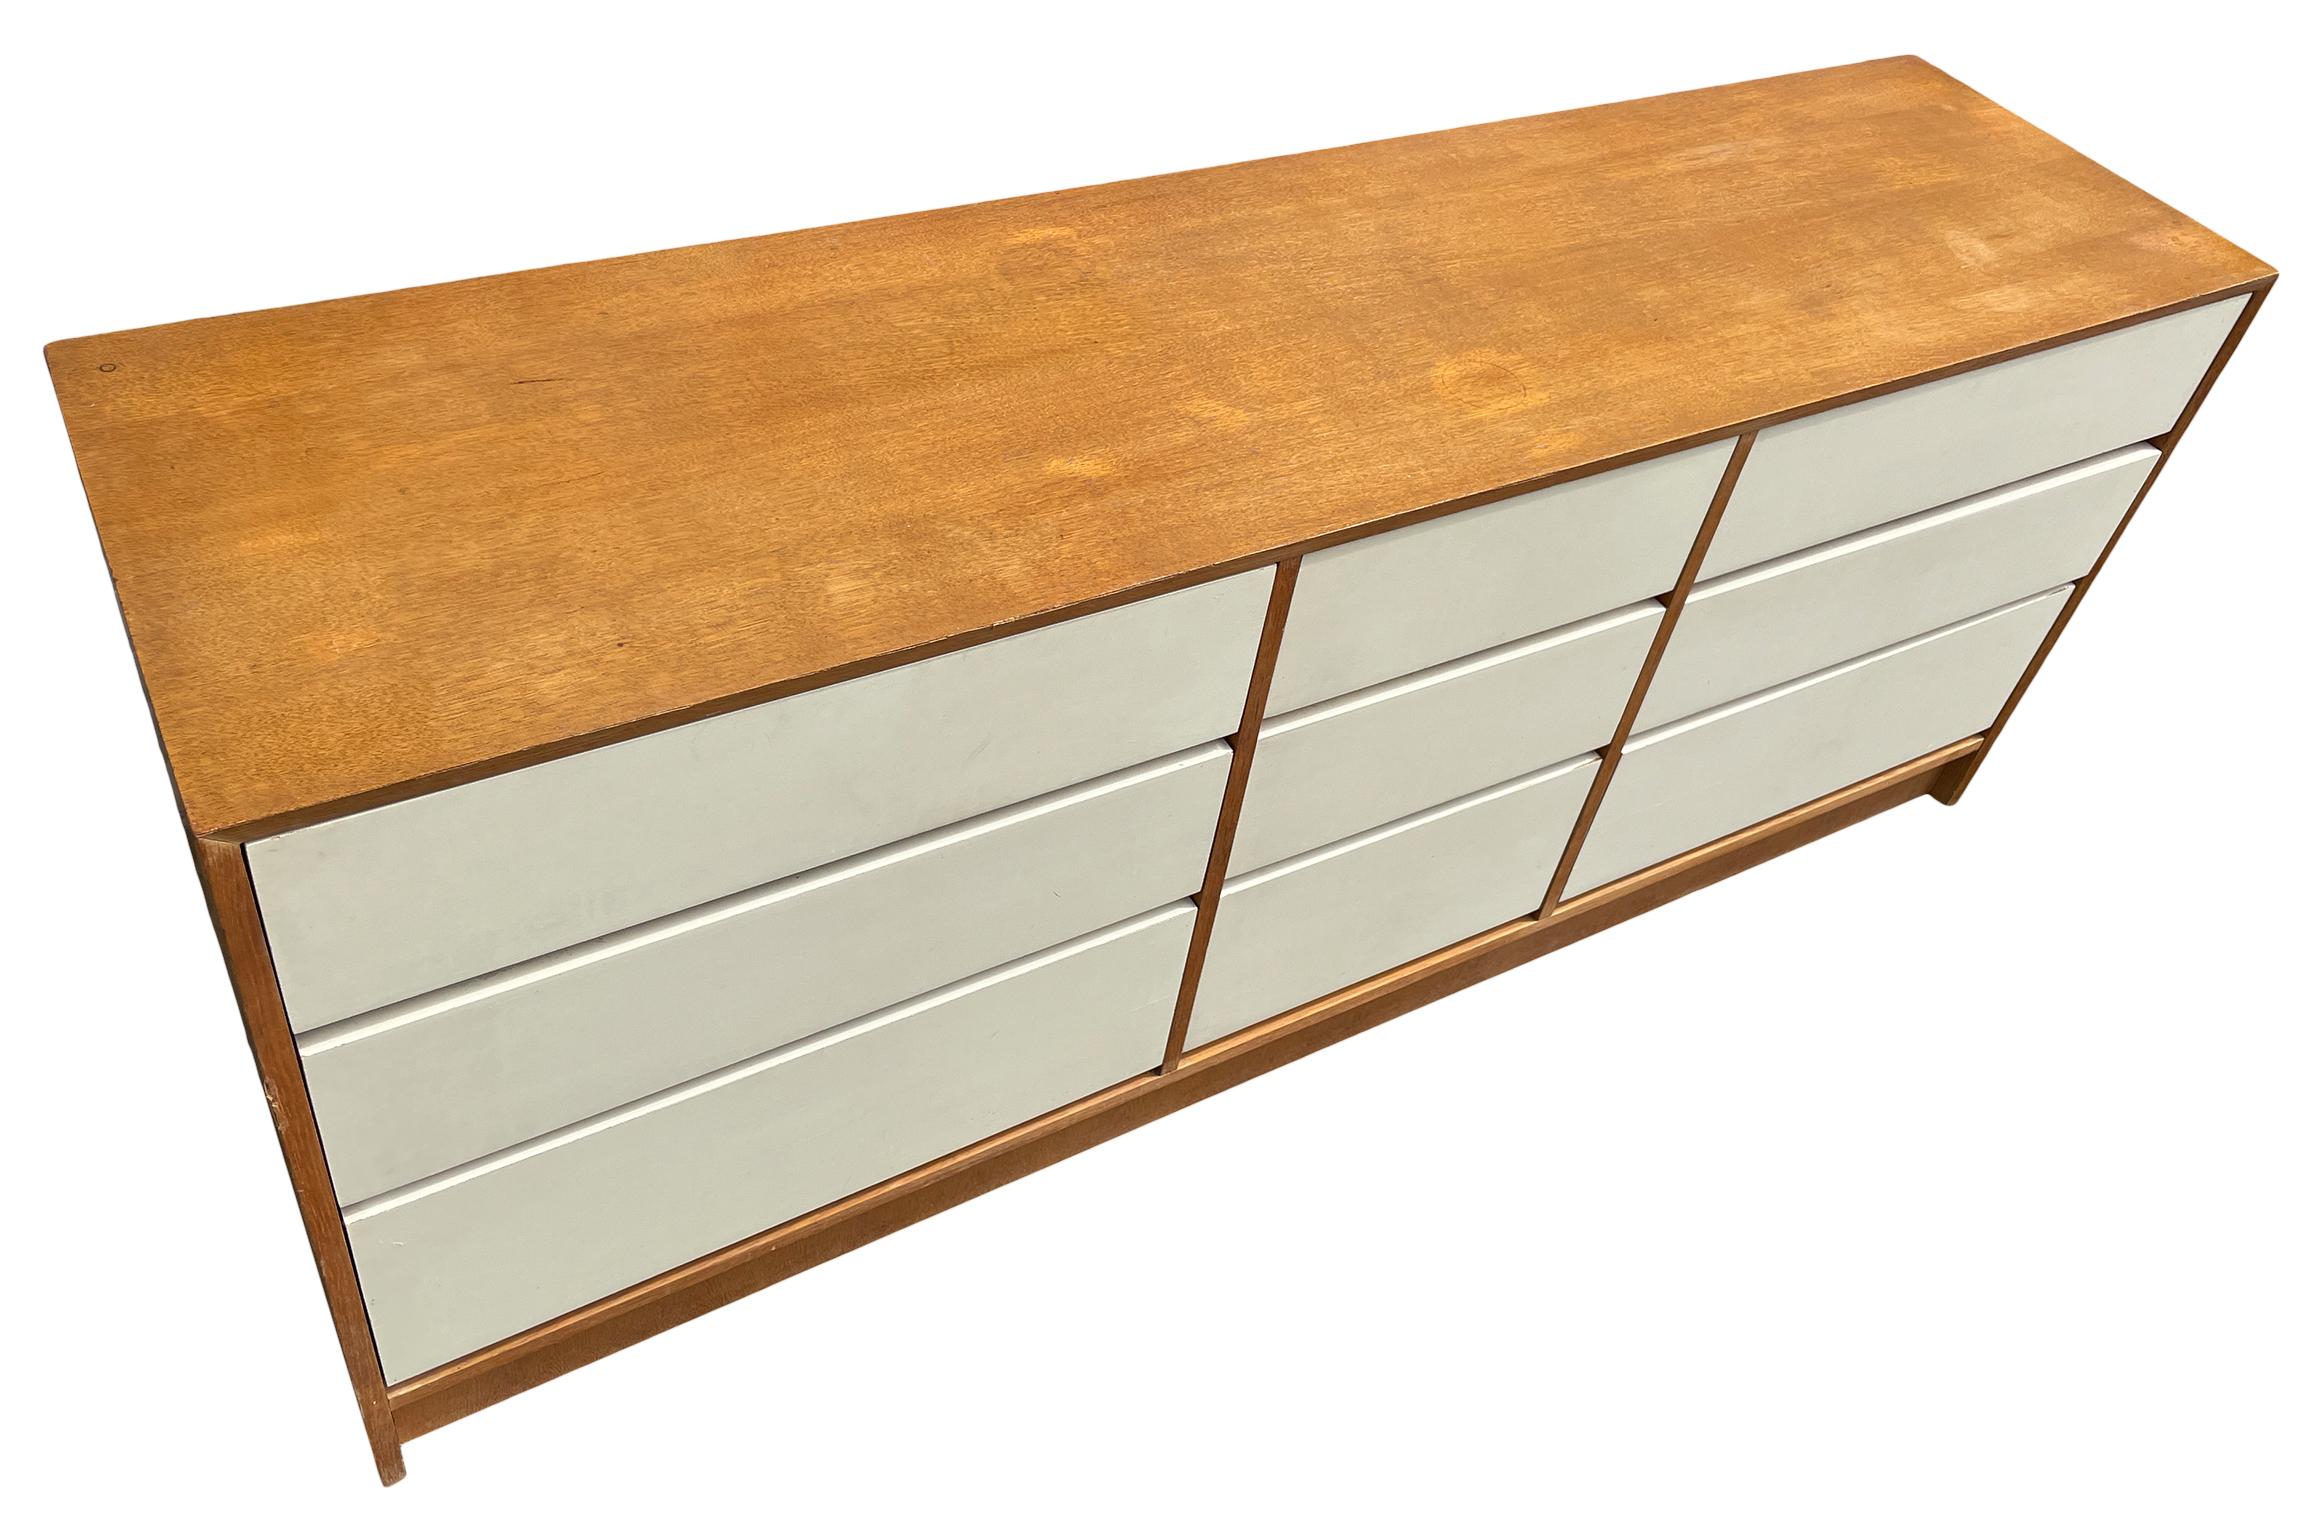 Polish Mid Century Modern 9 Drawer oak Credenza or Dresser Lacquer drawers